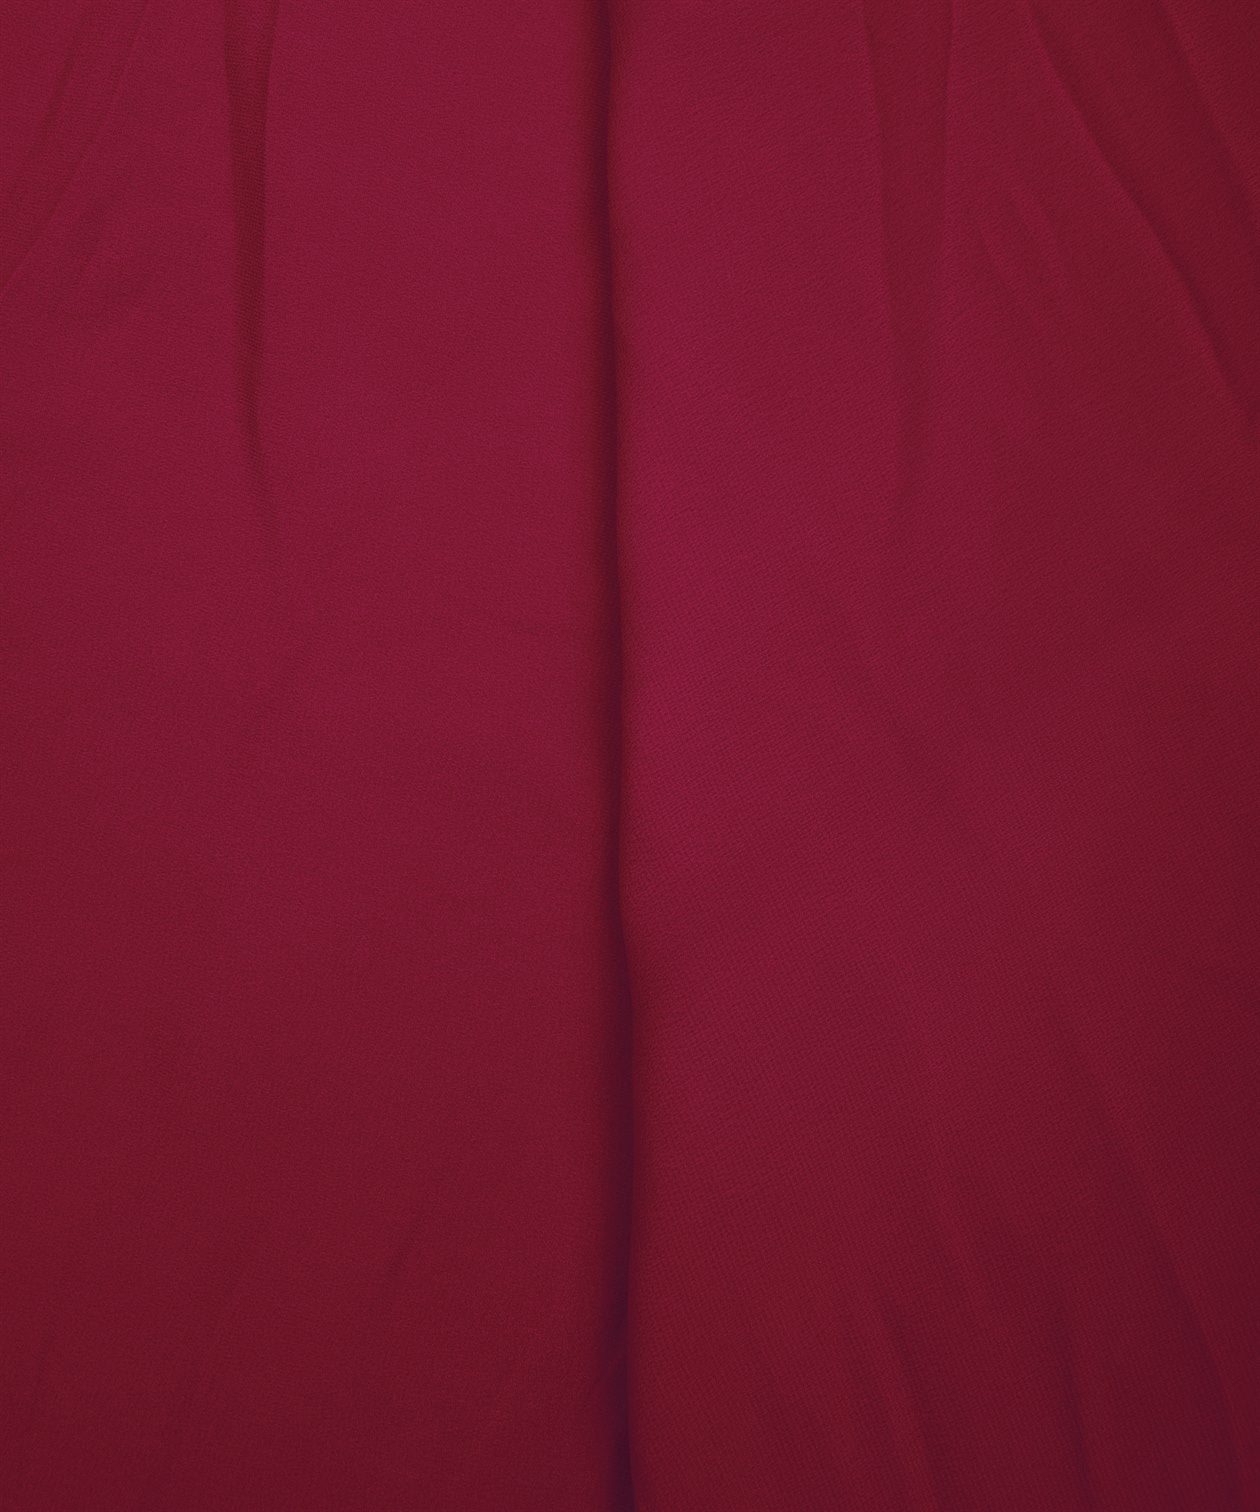 Hot Pink Plain Dyed Faux Georgette Fabric